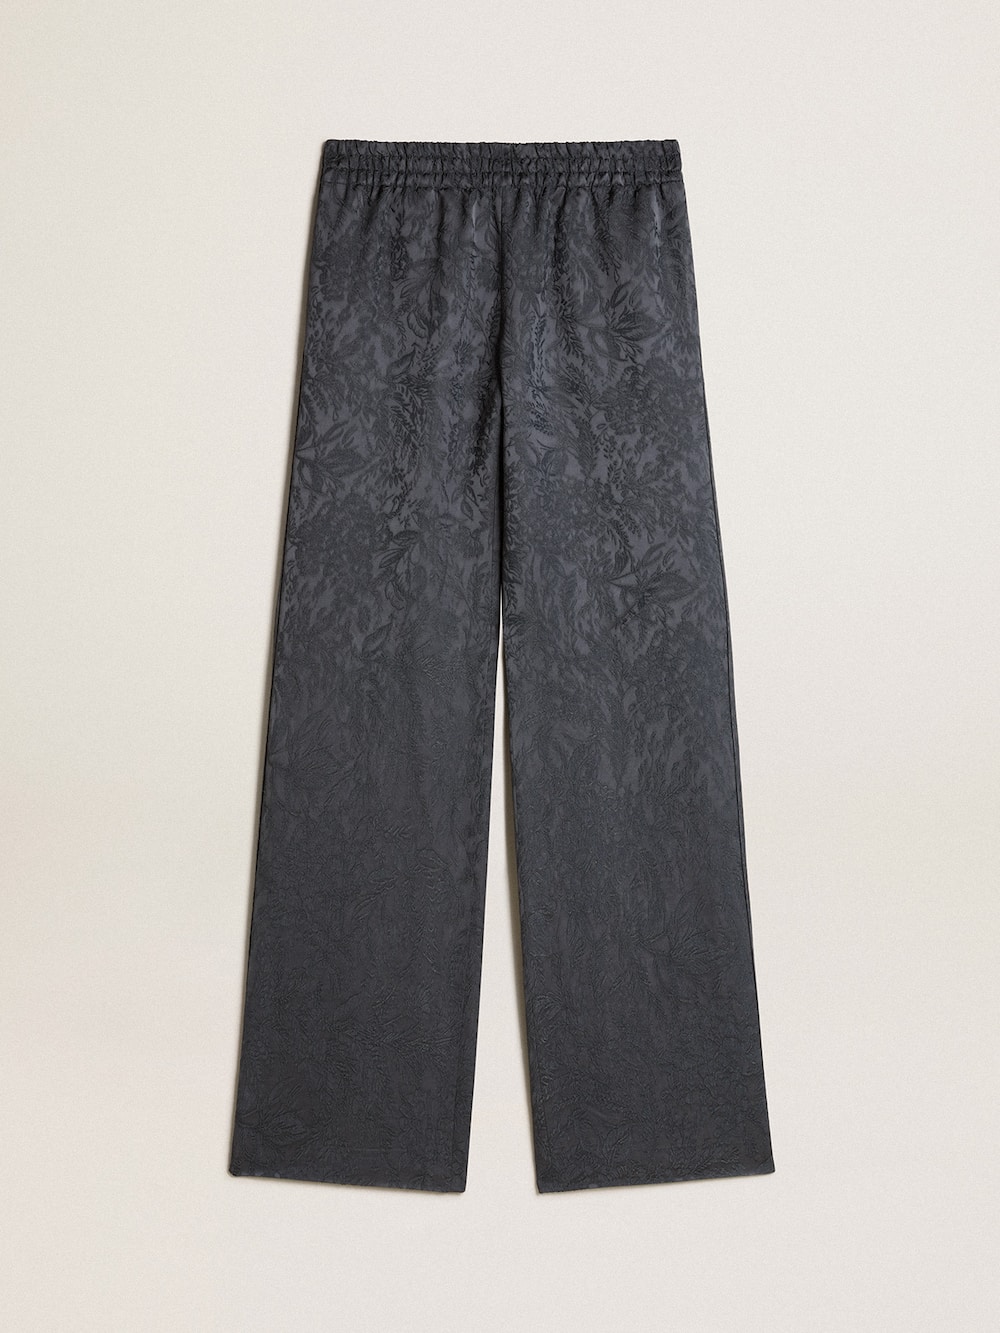 Golden Goose - Jacquard pants with all-over toile de jouy pattern in 